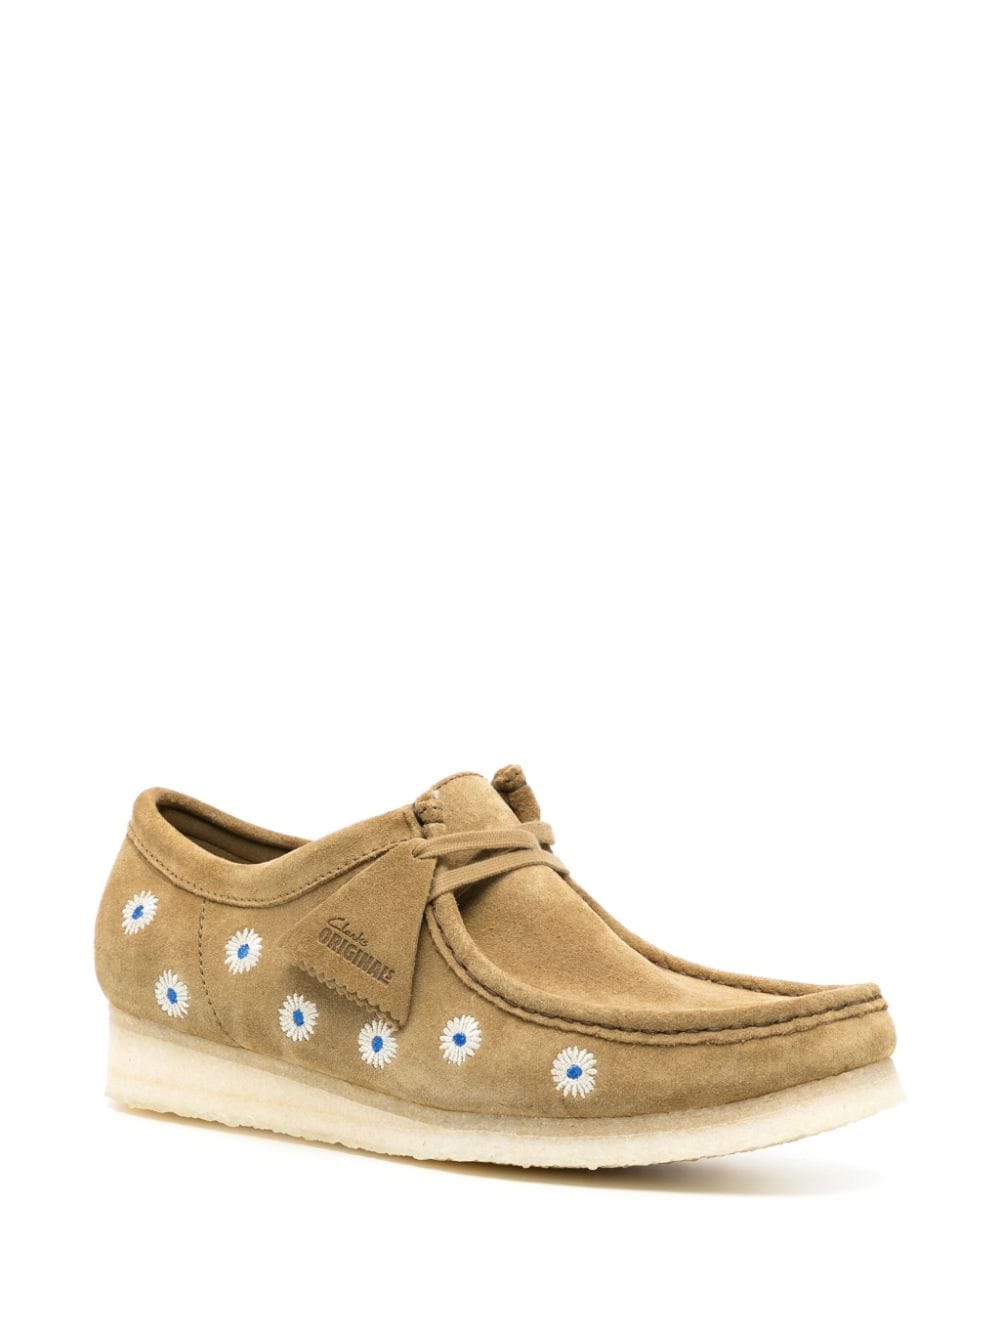 Clarks Wallabee suede lace-up shoes - Beige